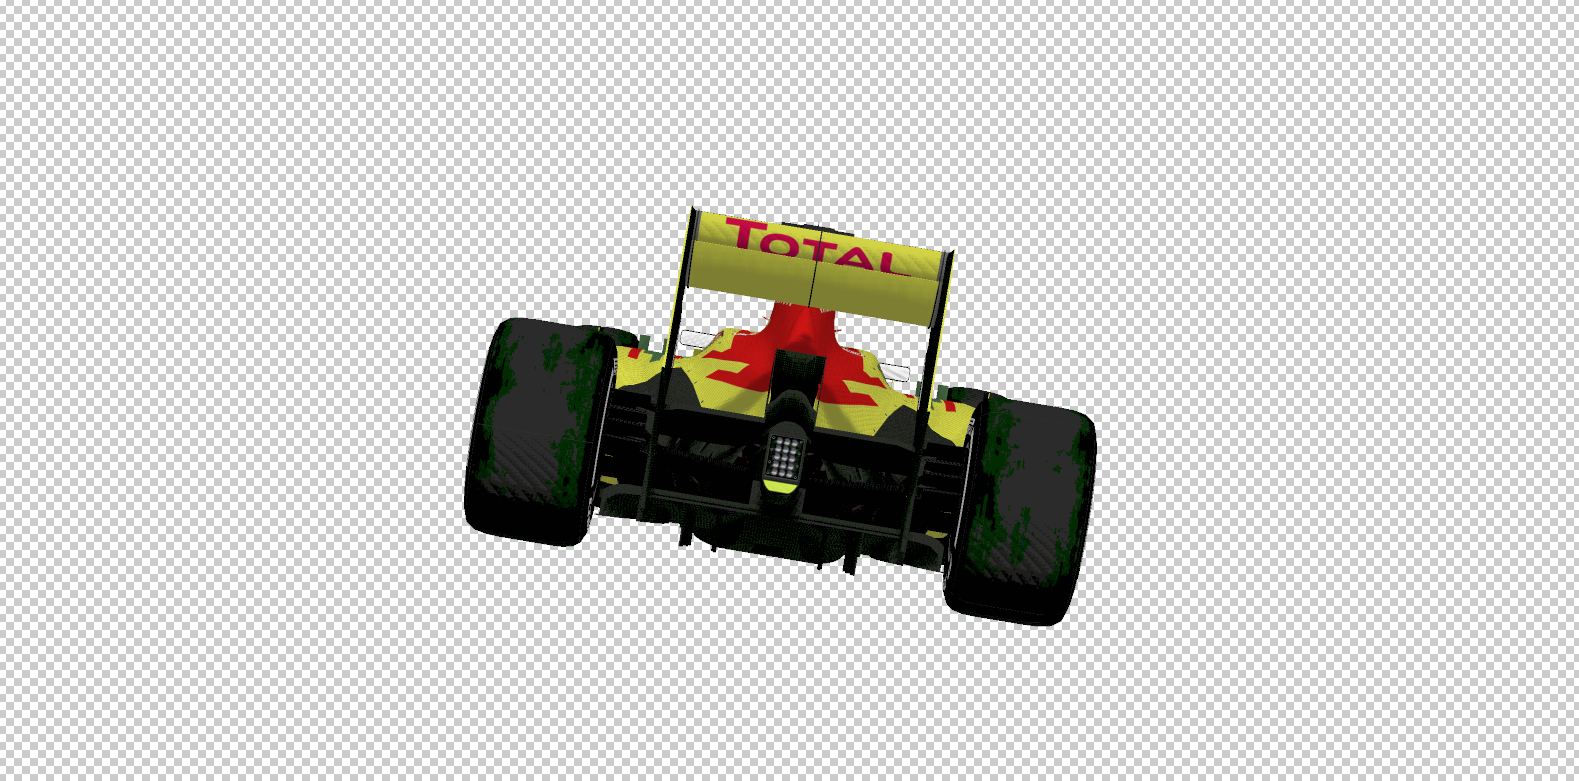 Force India Roshfrans Rear.PNG